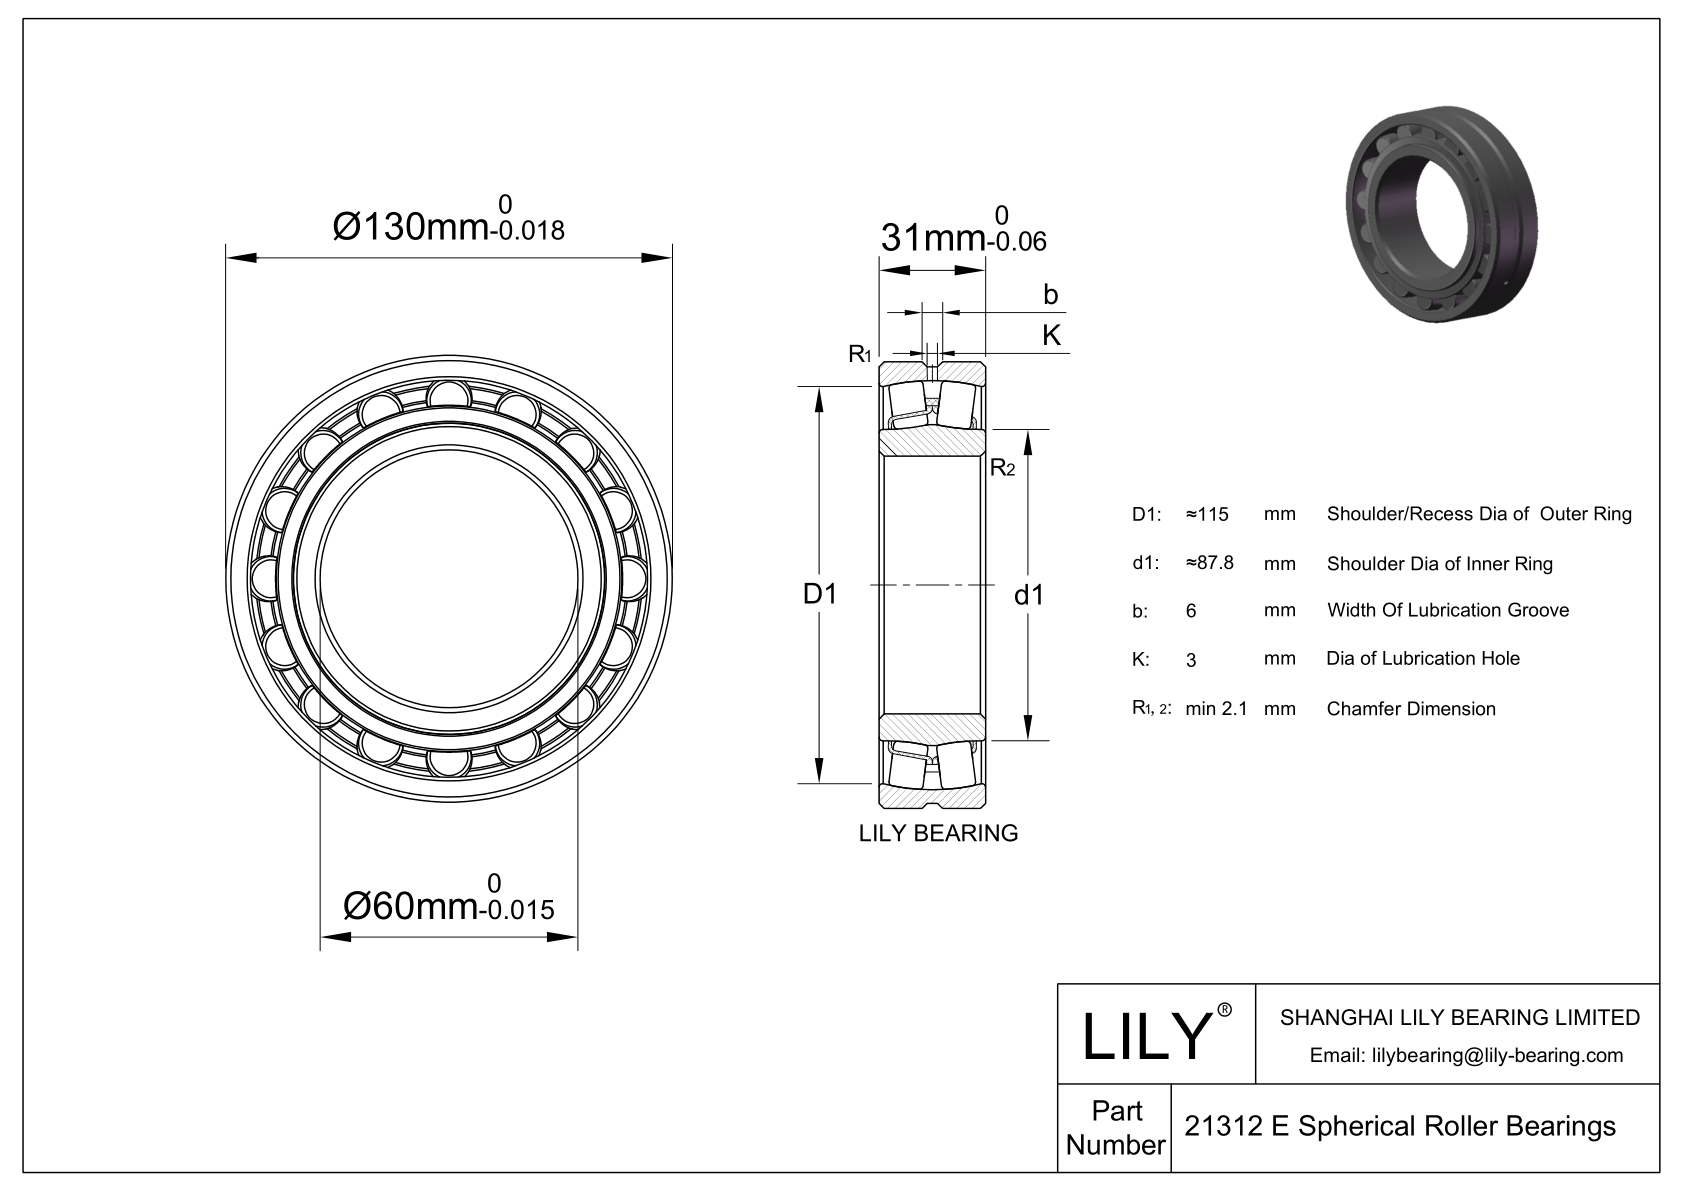 21312 E Double Row Spherical Roller Bearing cad drawing